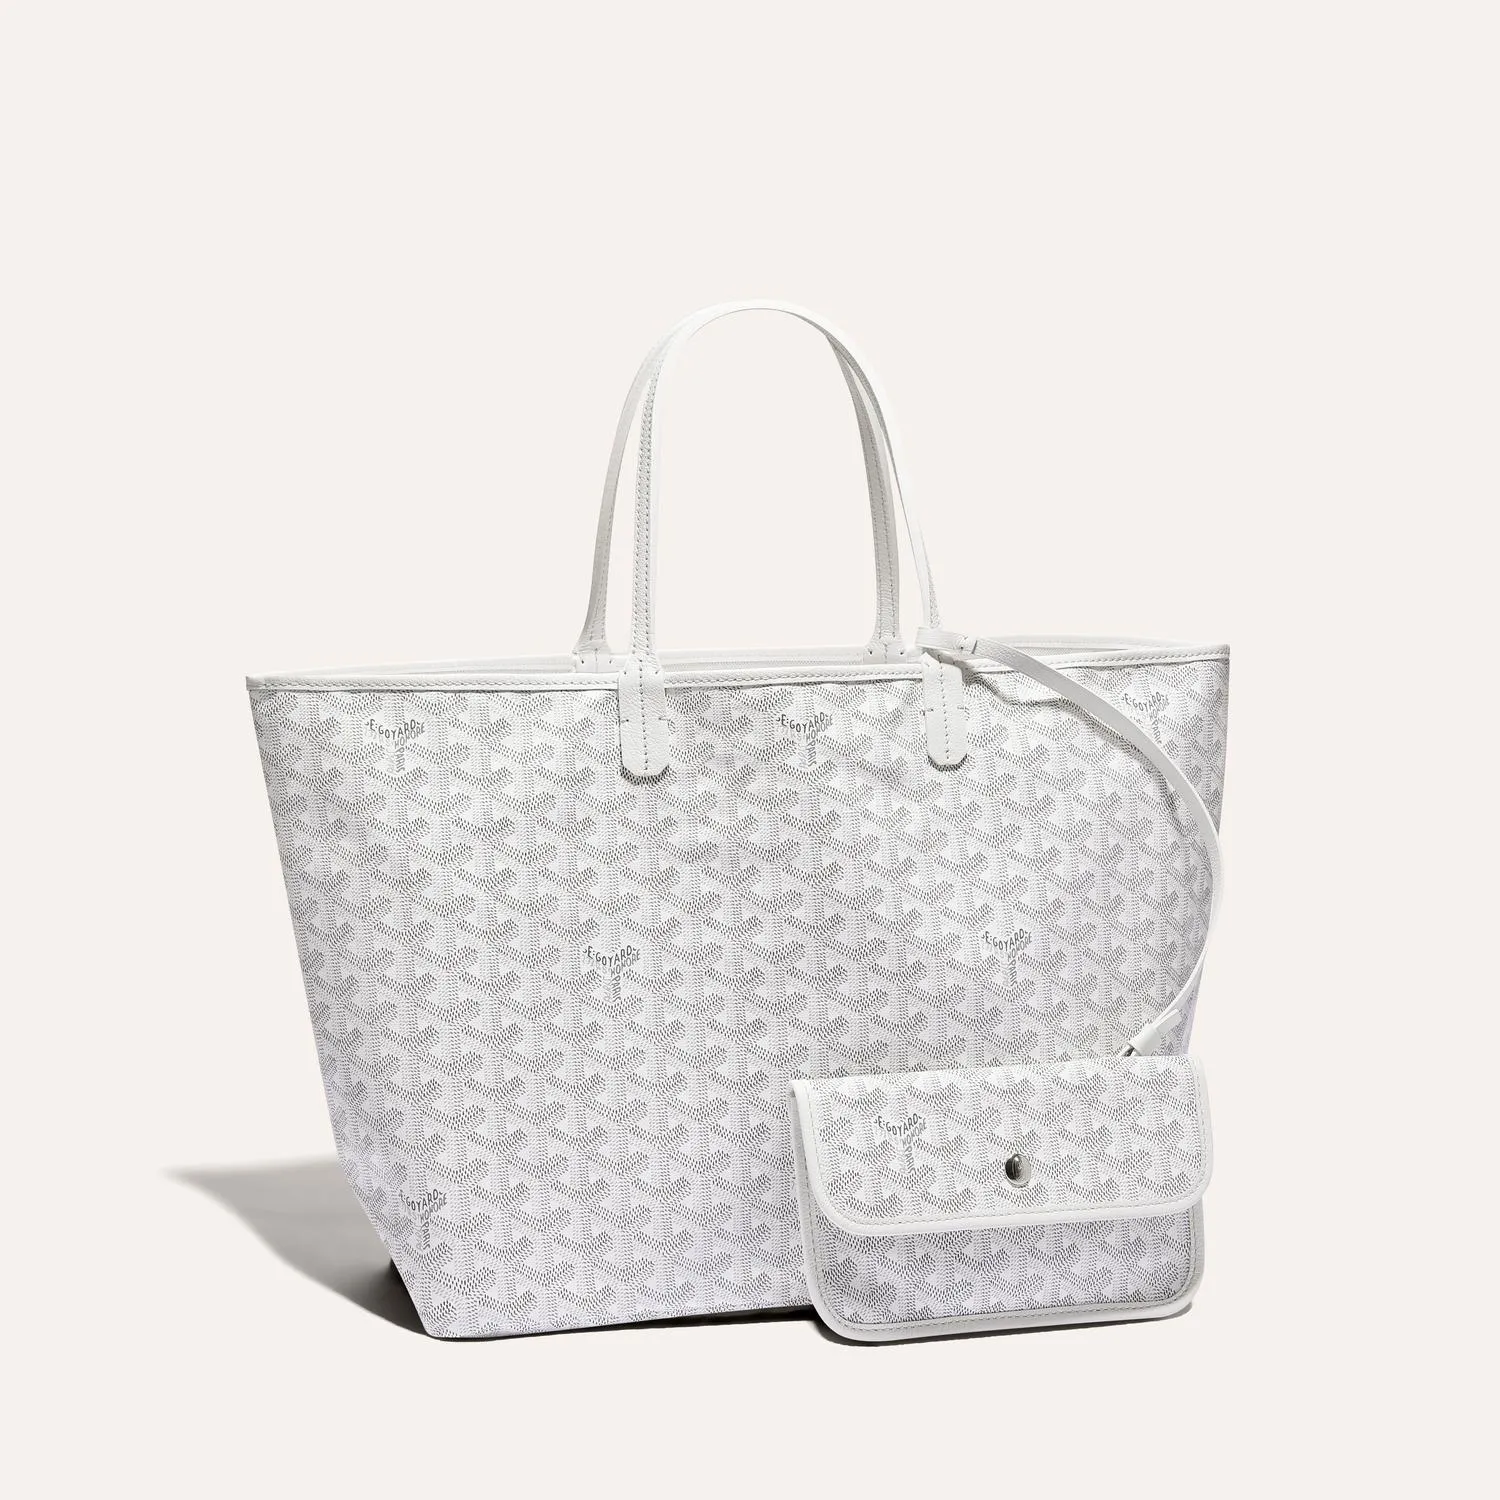 Image 1 of ゴヤール セントルイスPMバッグ  SAINT LOUISE TOTE PM WHIT